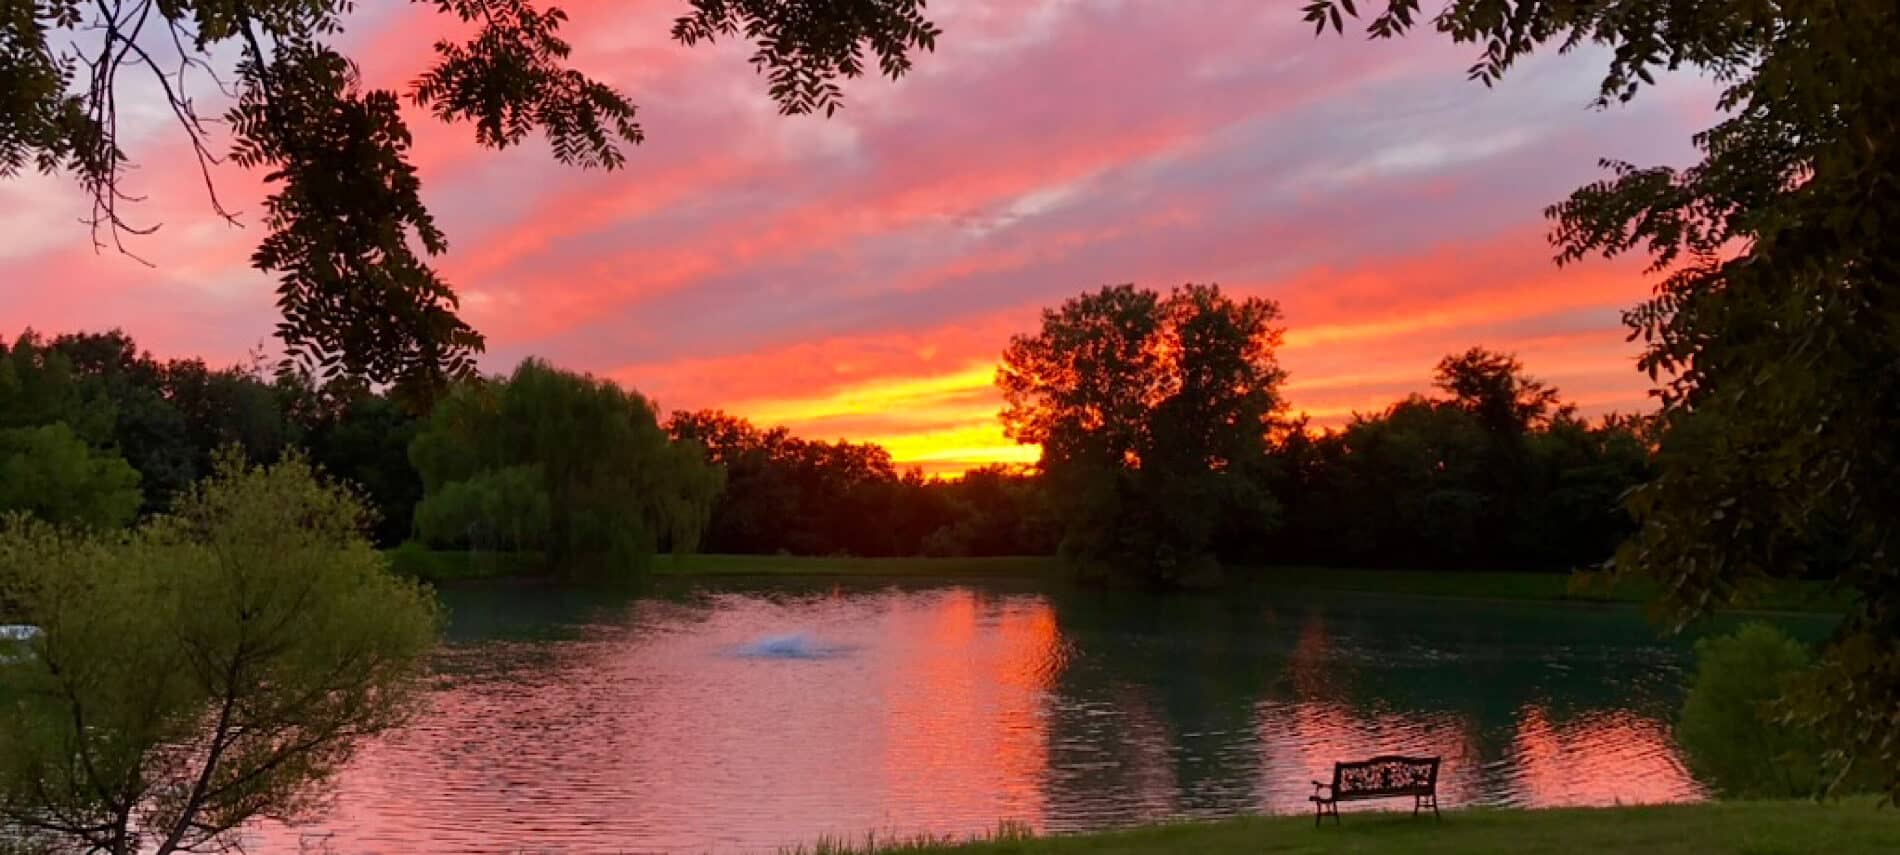 sunset over a pond with tree on the shoreline